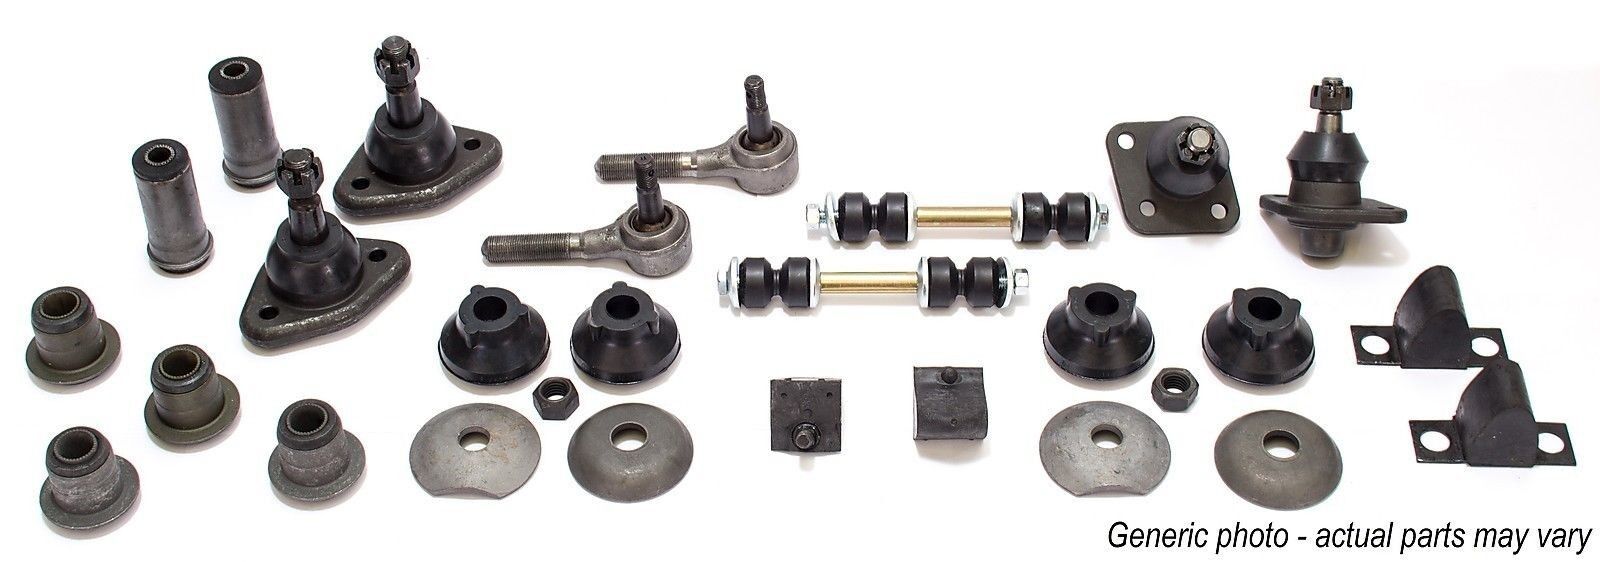 PST Original Front End Kit 1972 Ford/Lincoln/Mercury (to 3/14/72)